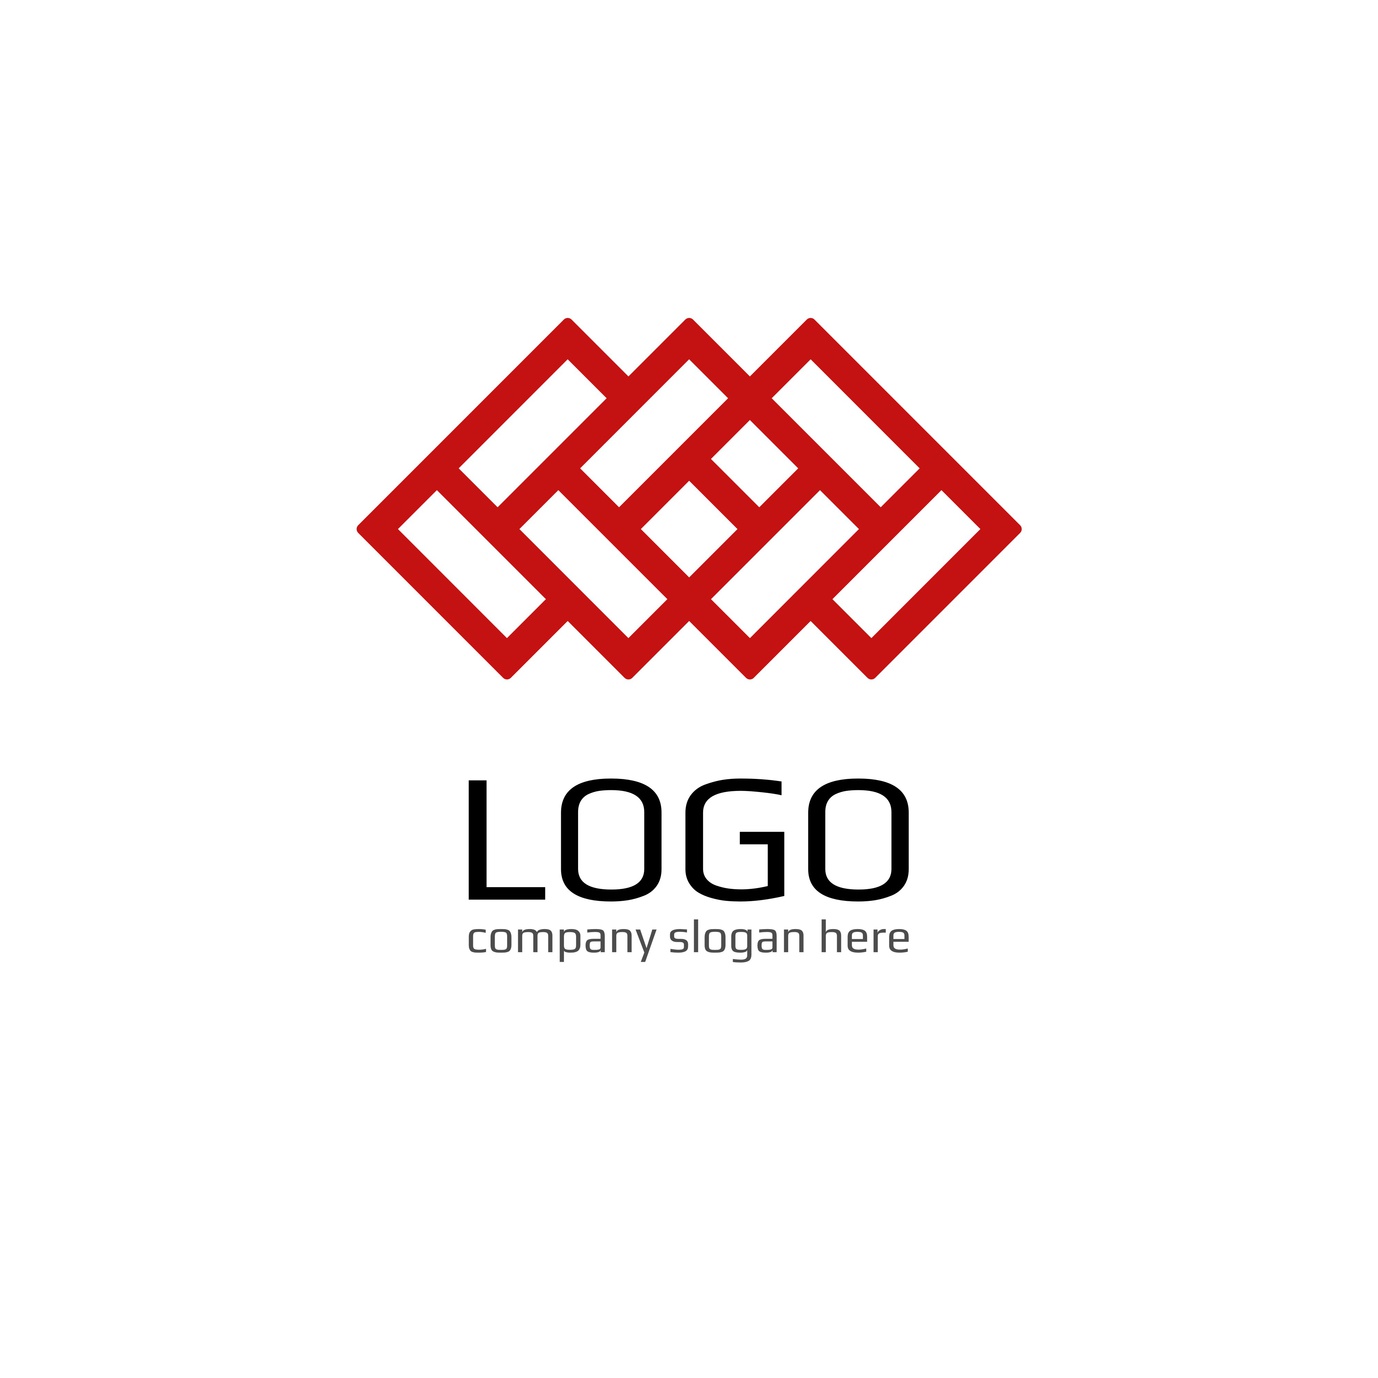 A Guide to Creating Crystal Clear Window and Door Company Logos • Online Logo Maker's Blog